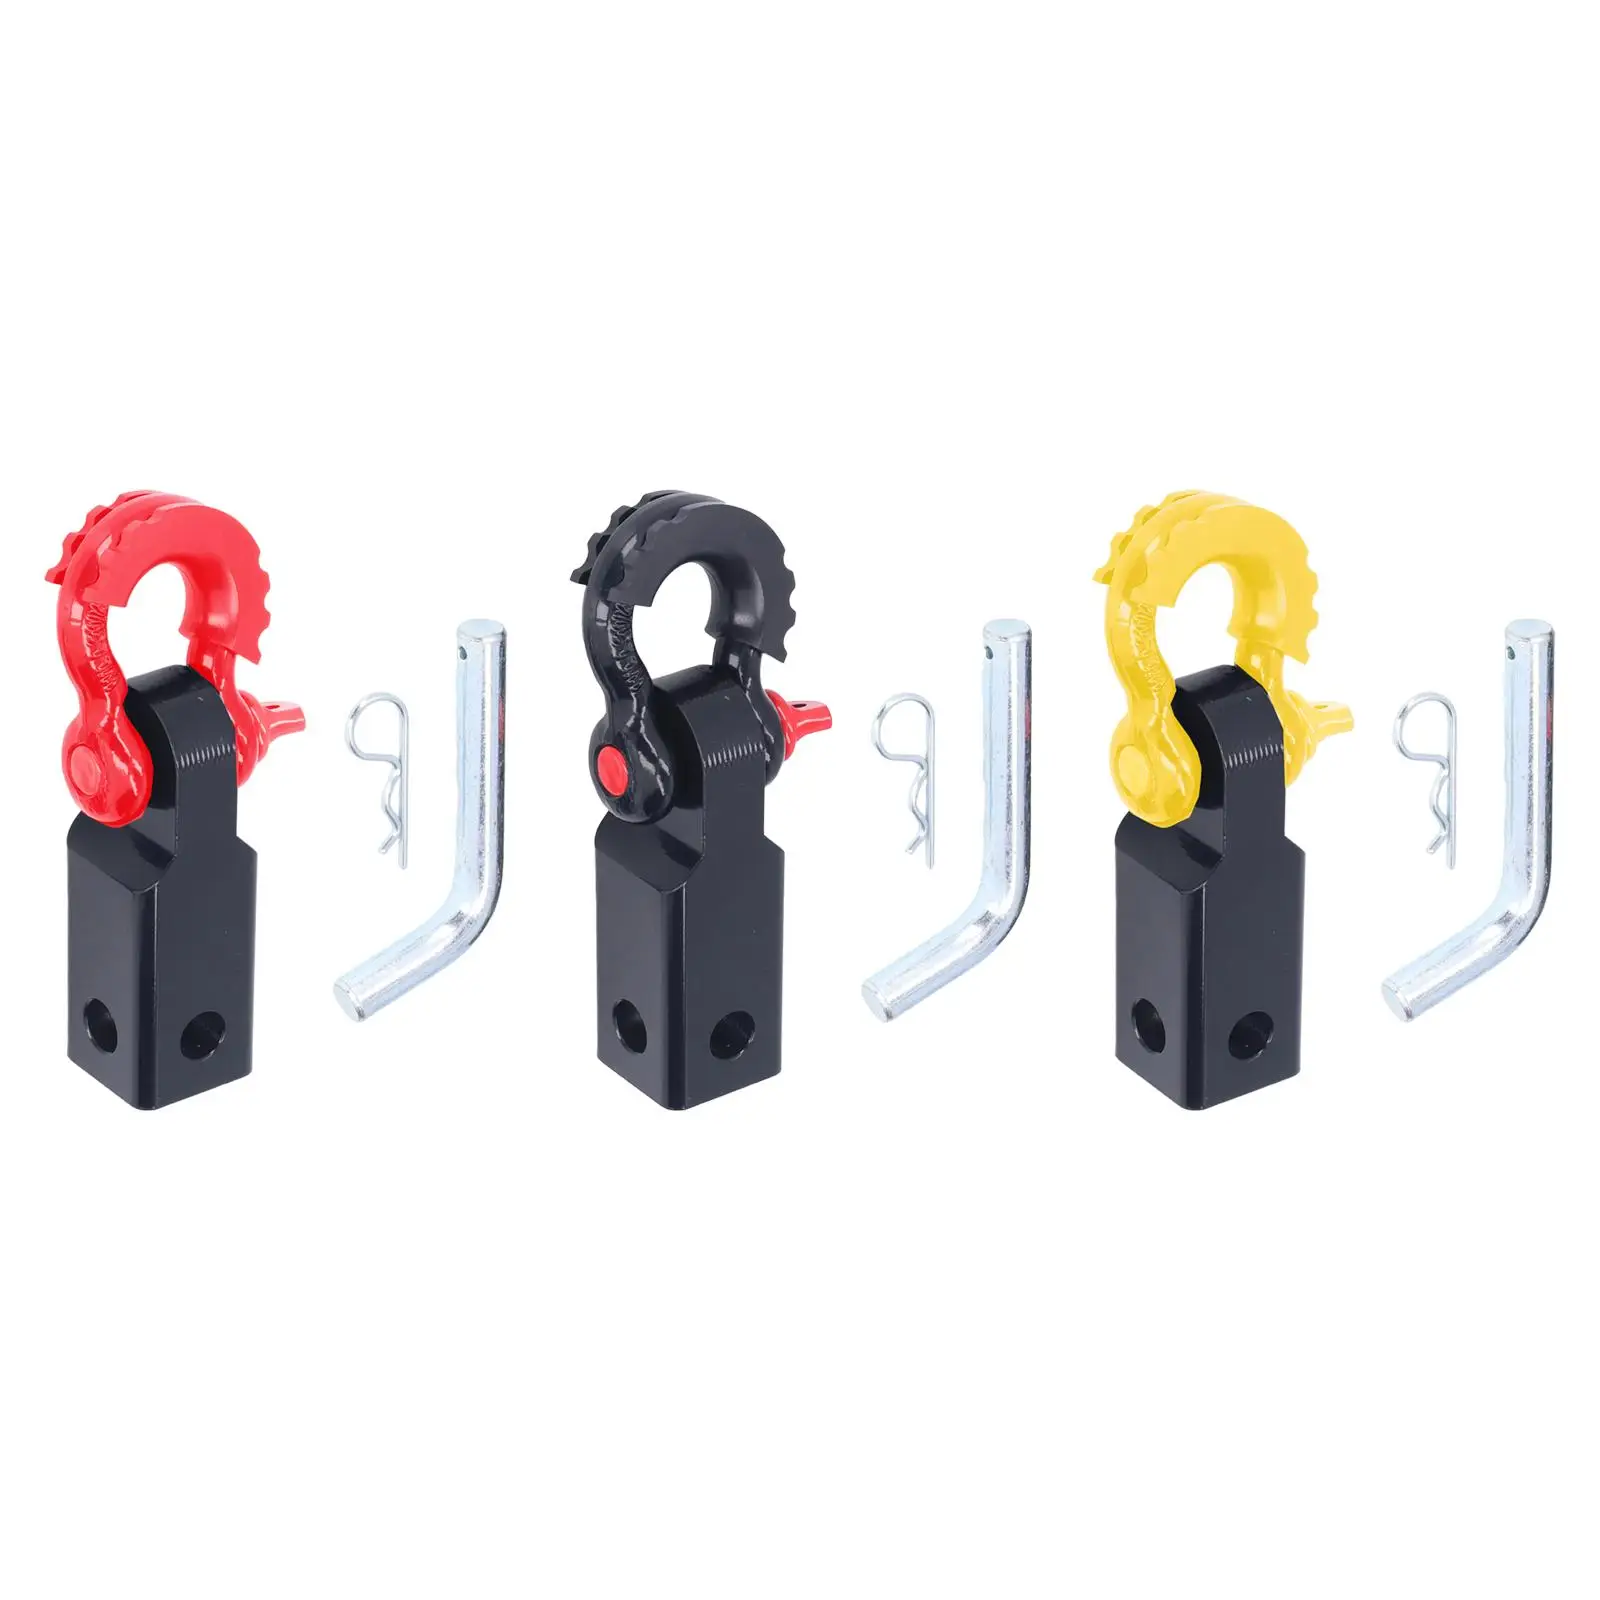 Shackle Hitch Receiver Fittings Towing Kits for Trucks Trailer Vehicle